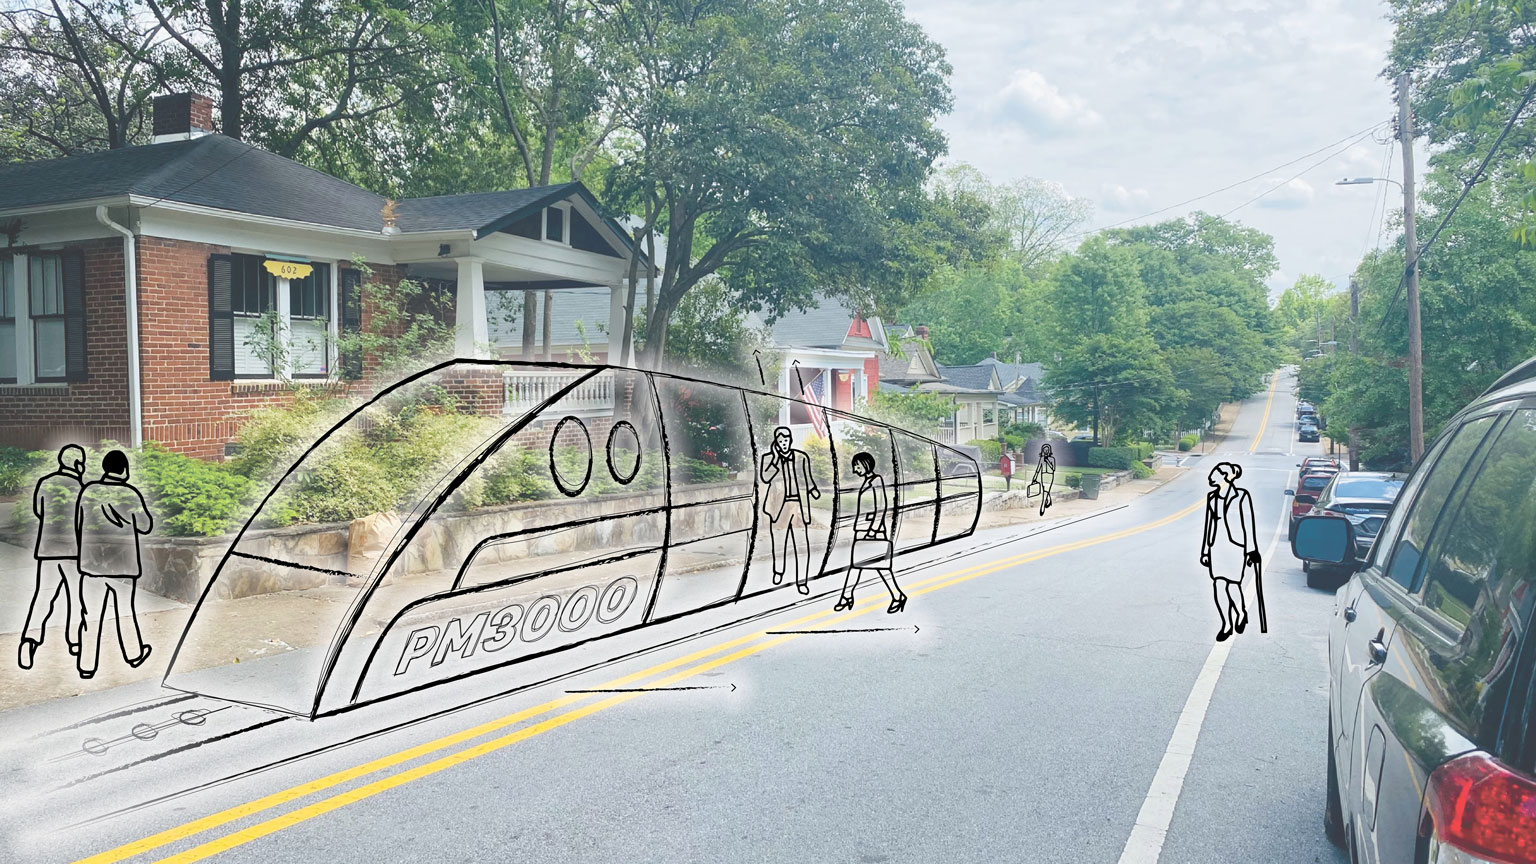 An illustration of a futuristic people mover overlaid on a photo of a house in a neighborhood in East Atlanta.